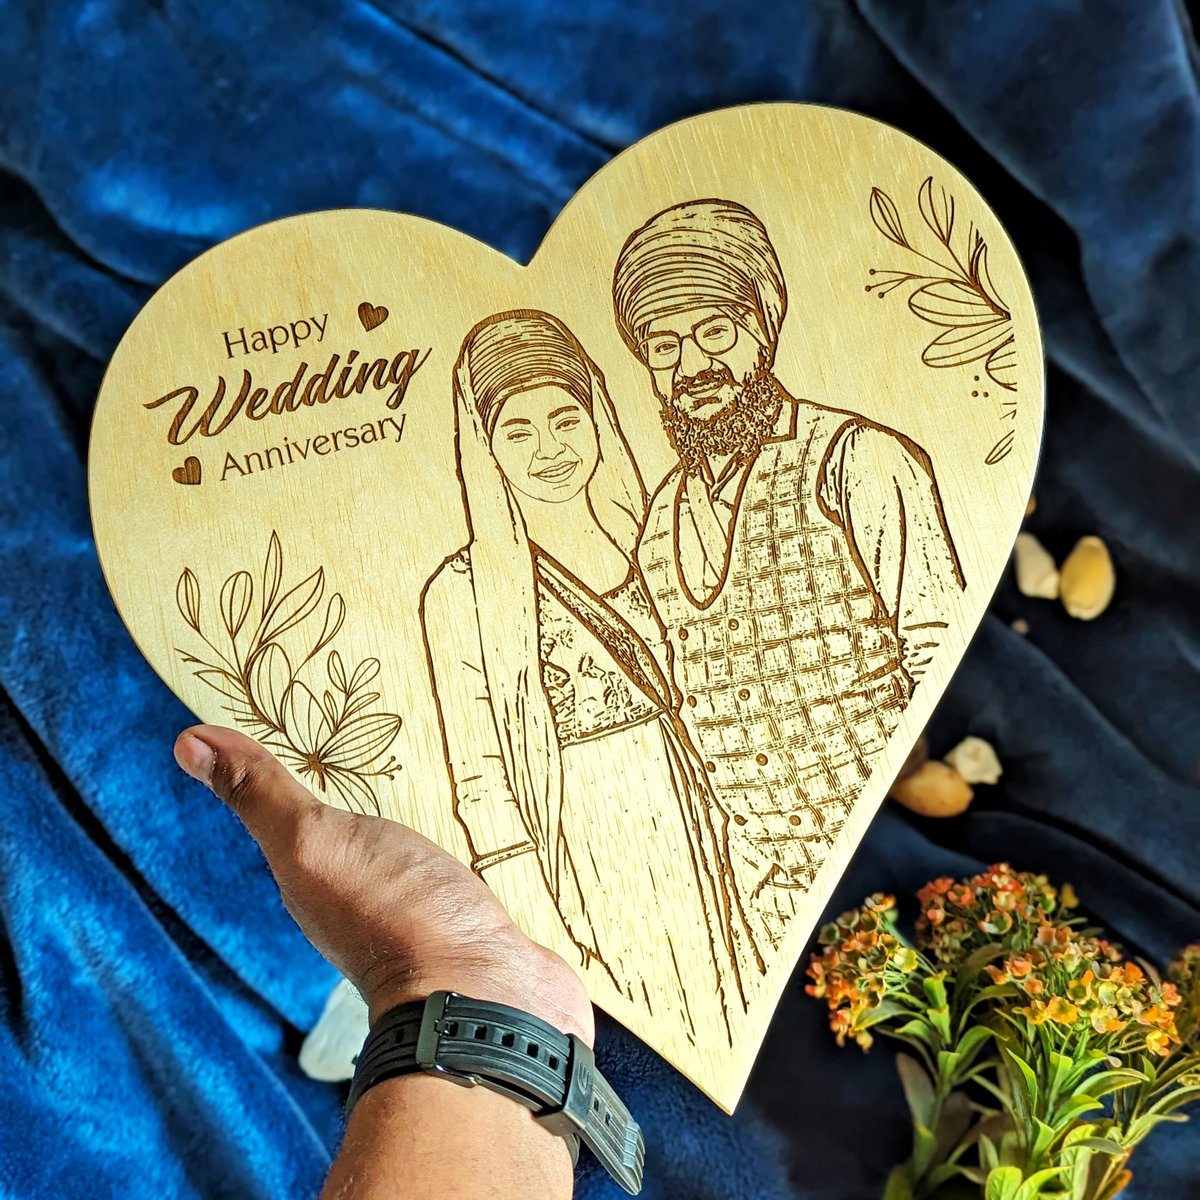 Looking for the perfect anniversary gift? Look no further! This personalized heart-shaped frame with a custom engraving makes a heartfelt and unique present.

#giftideas #anniversarypresent #lovestory #giftsforcouples #romanticgifts #personalisedgifts #woodgeek #woodgeekstore